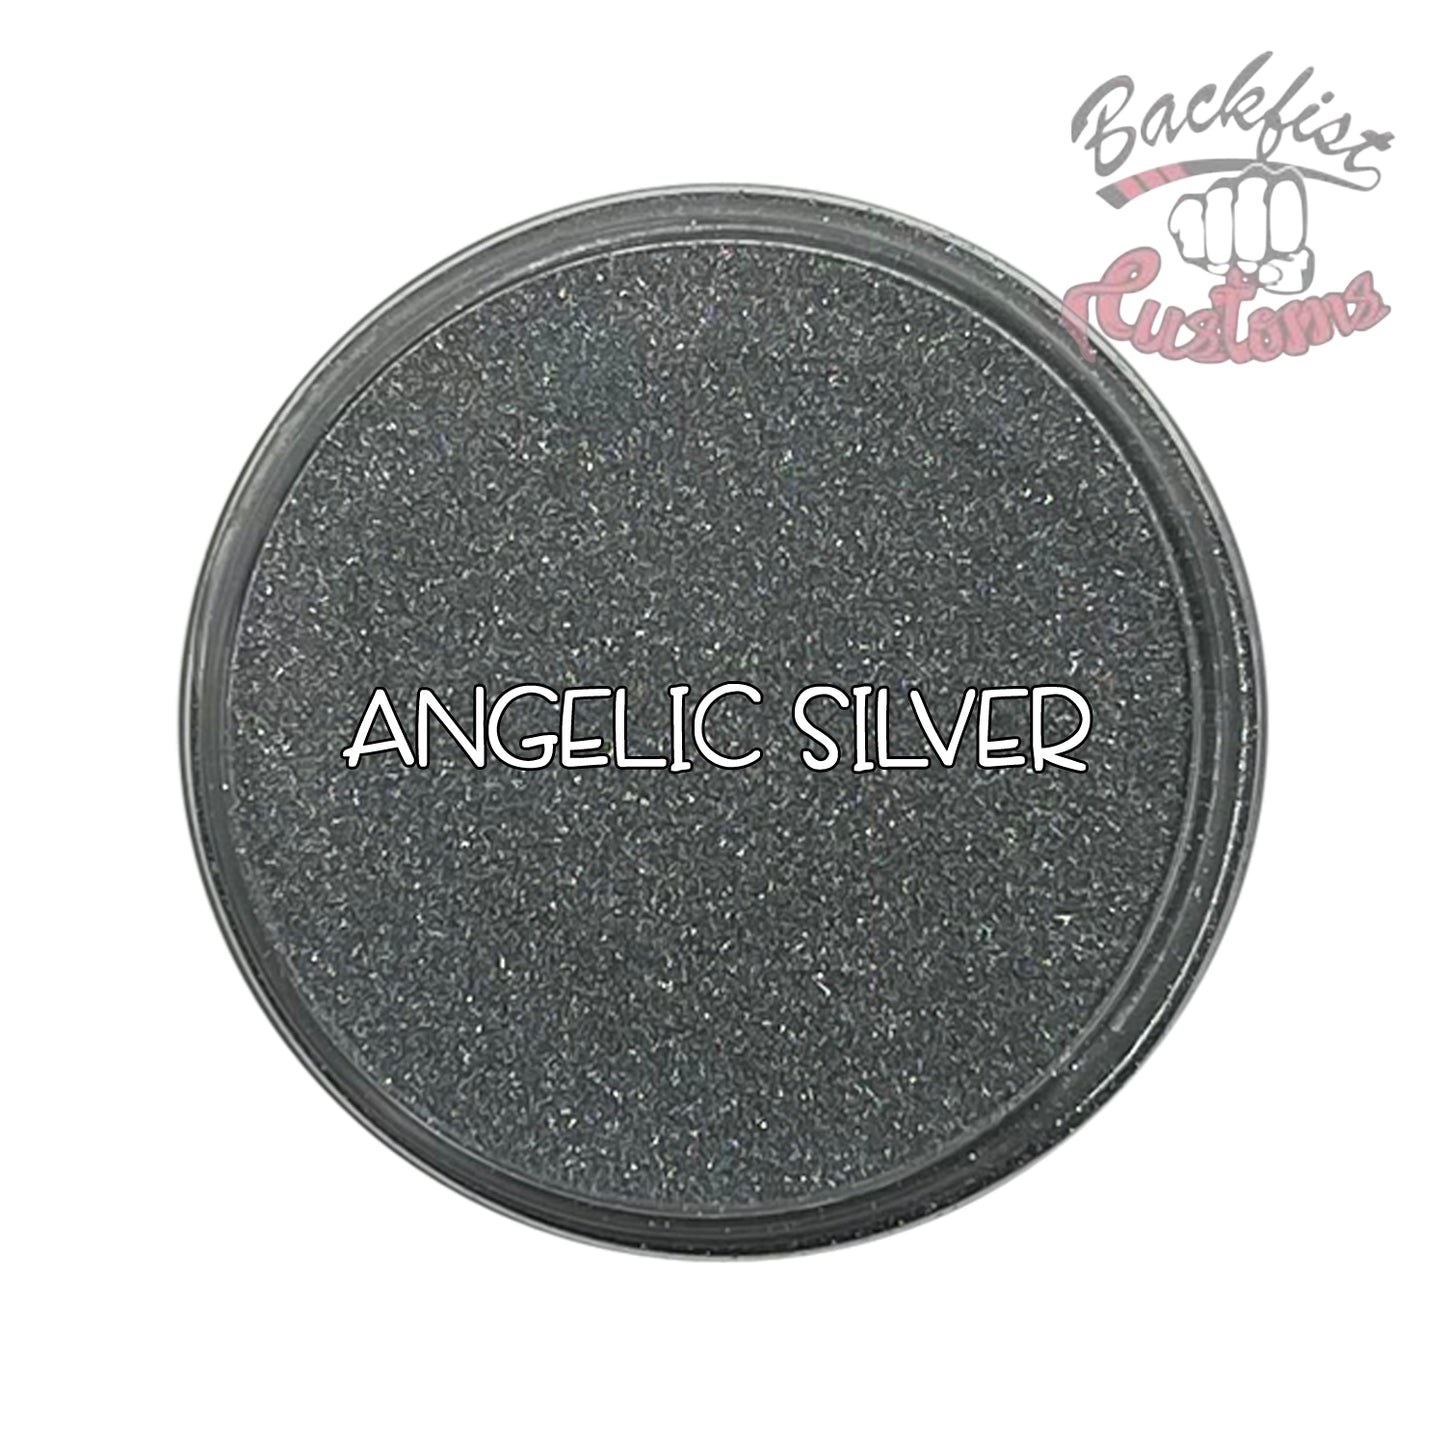 Angelic Silver